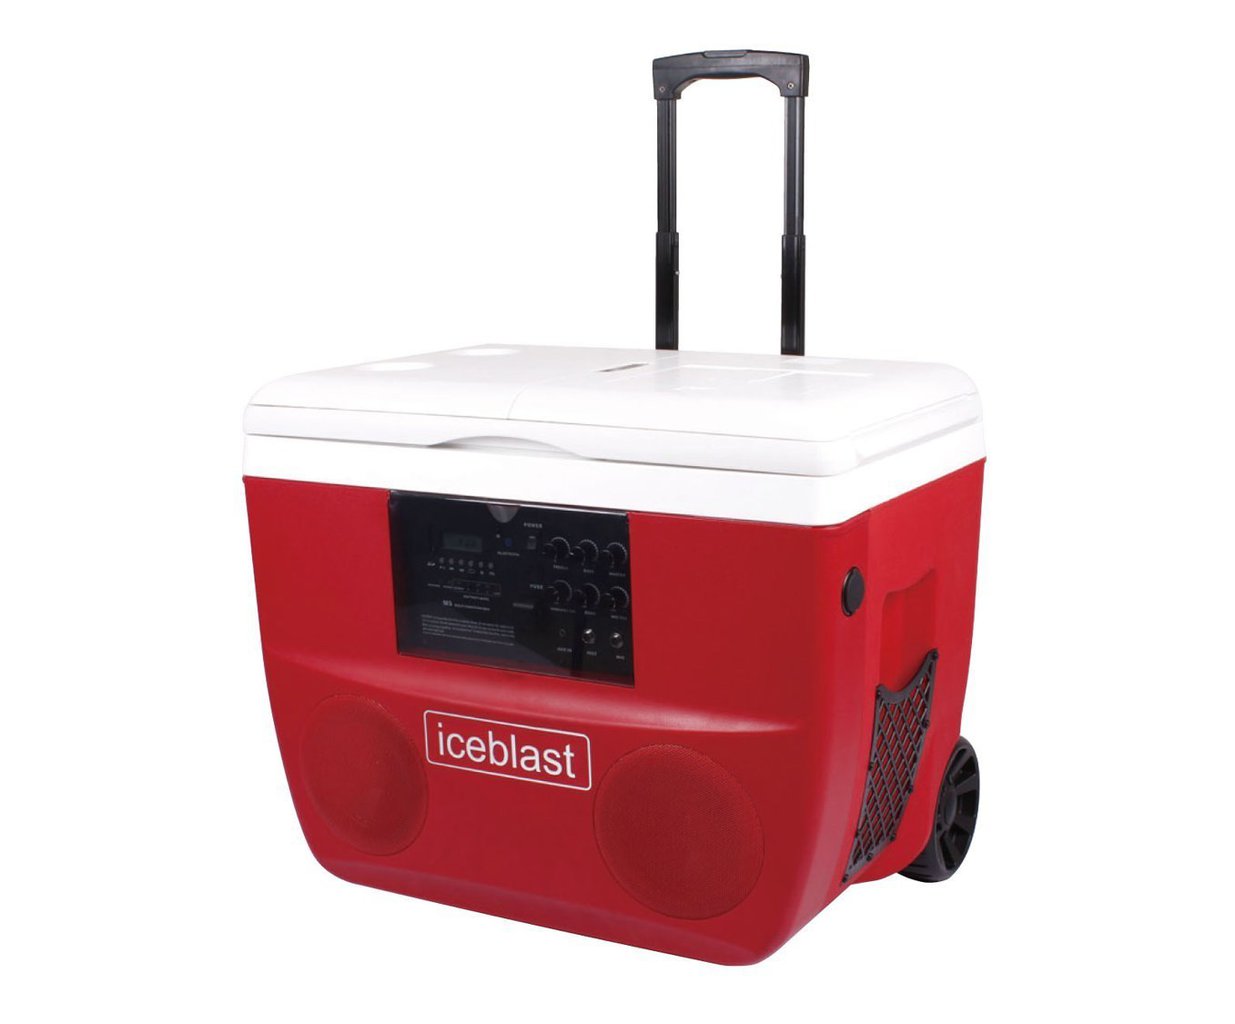 One of the best coolers you can buy this year.